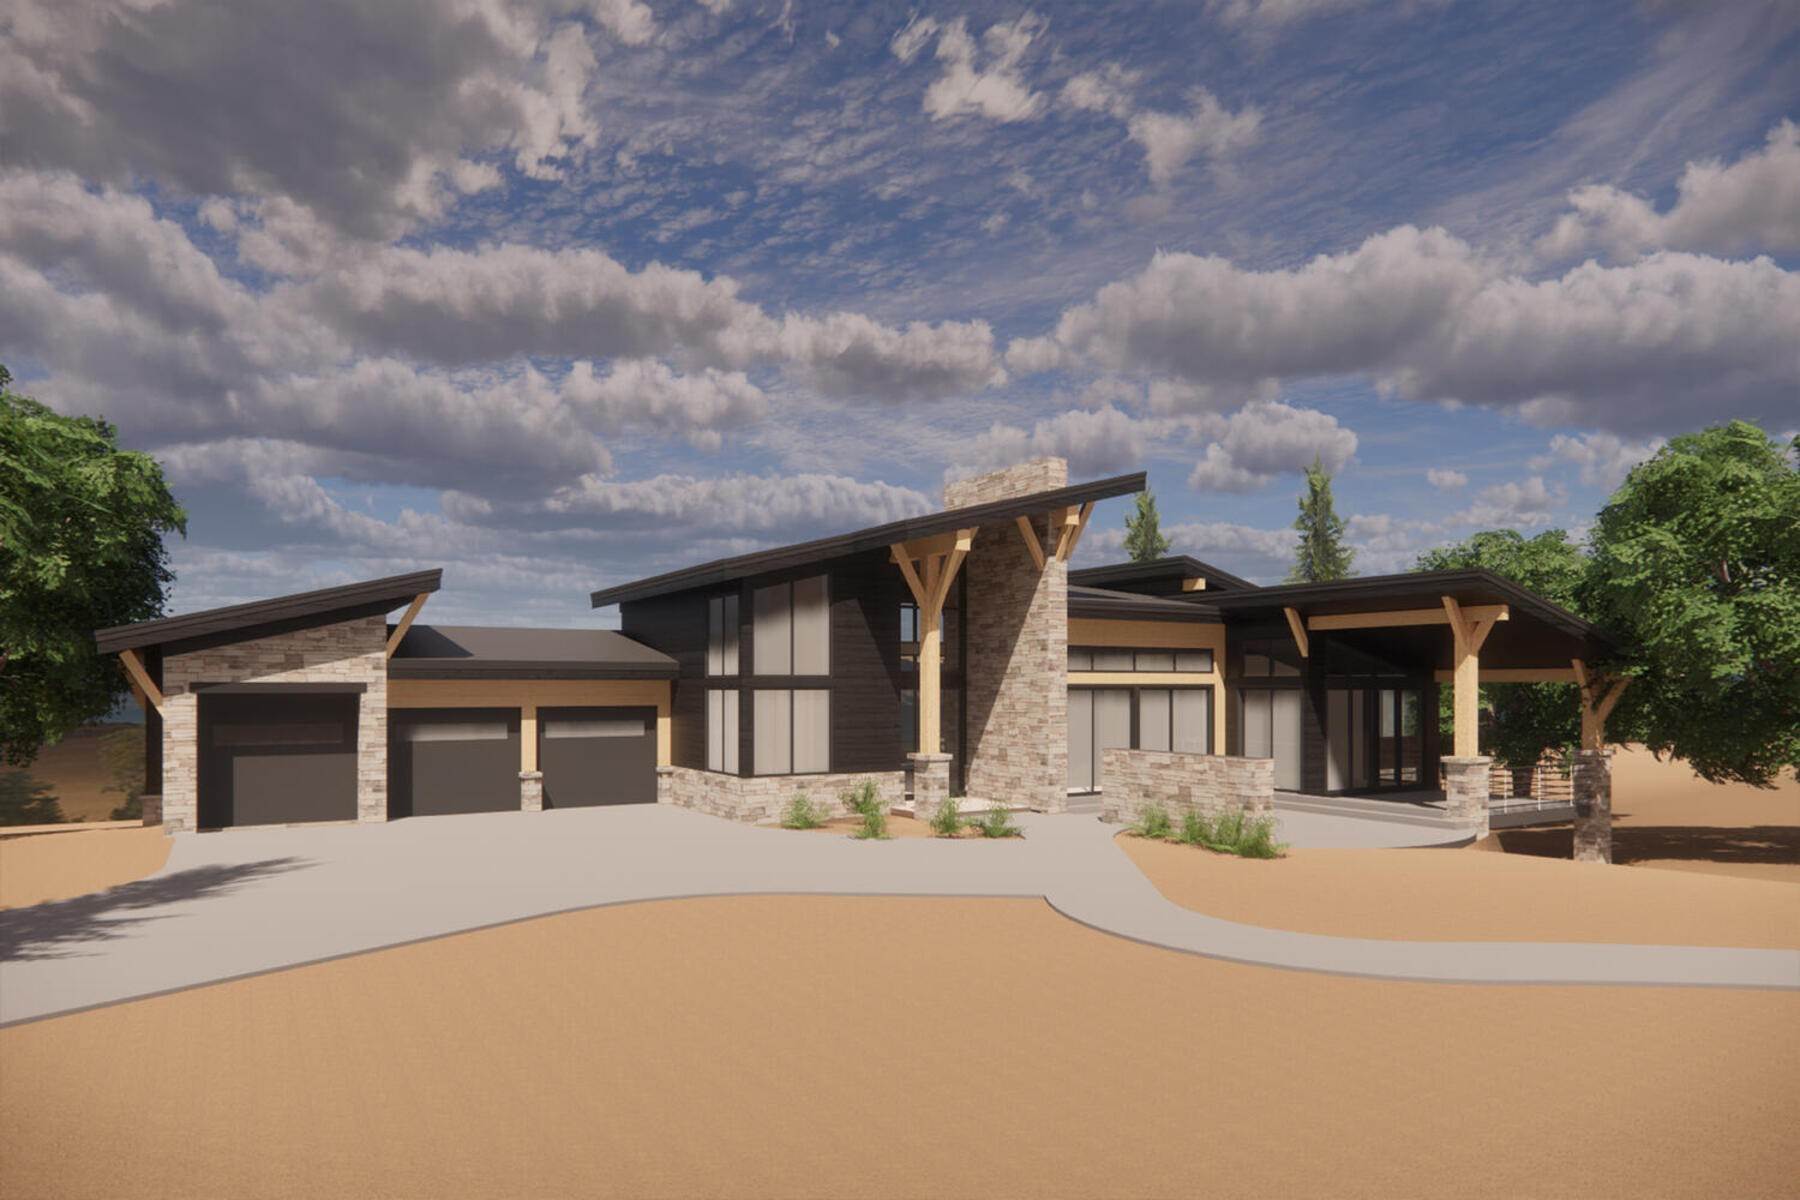 Single Family Homes for Sale at New Luxury Mountain Modern Retreat At Red Ledges With Views Of Mt. Timpanogos 3035 Corral Peak Circle Heber City, Utah 84032 United States